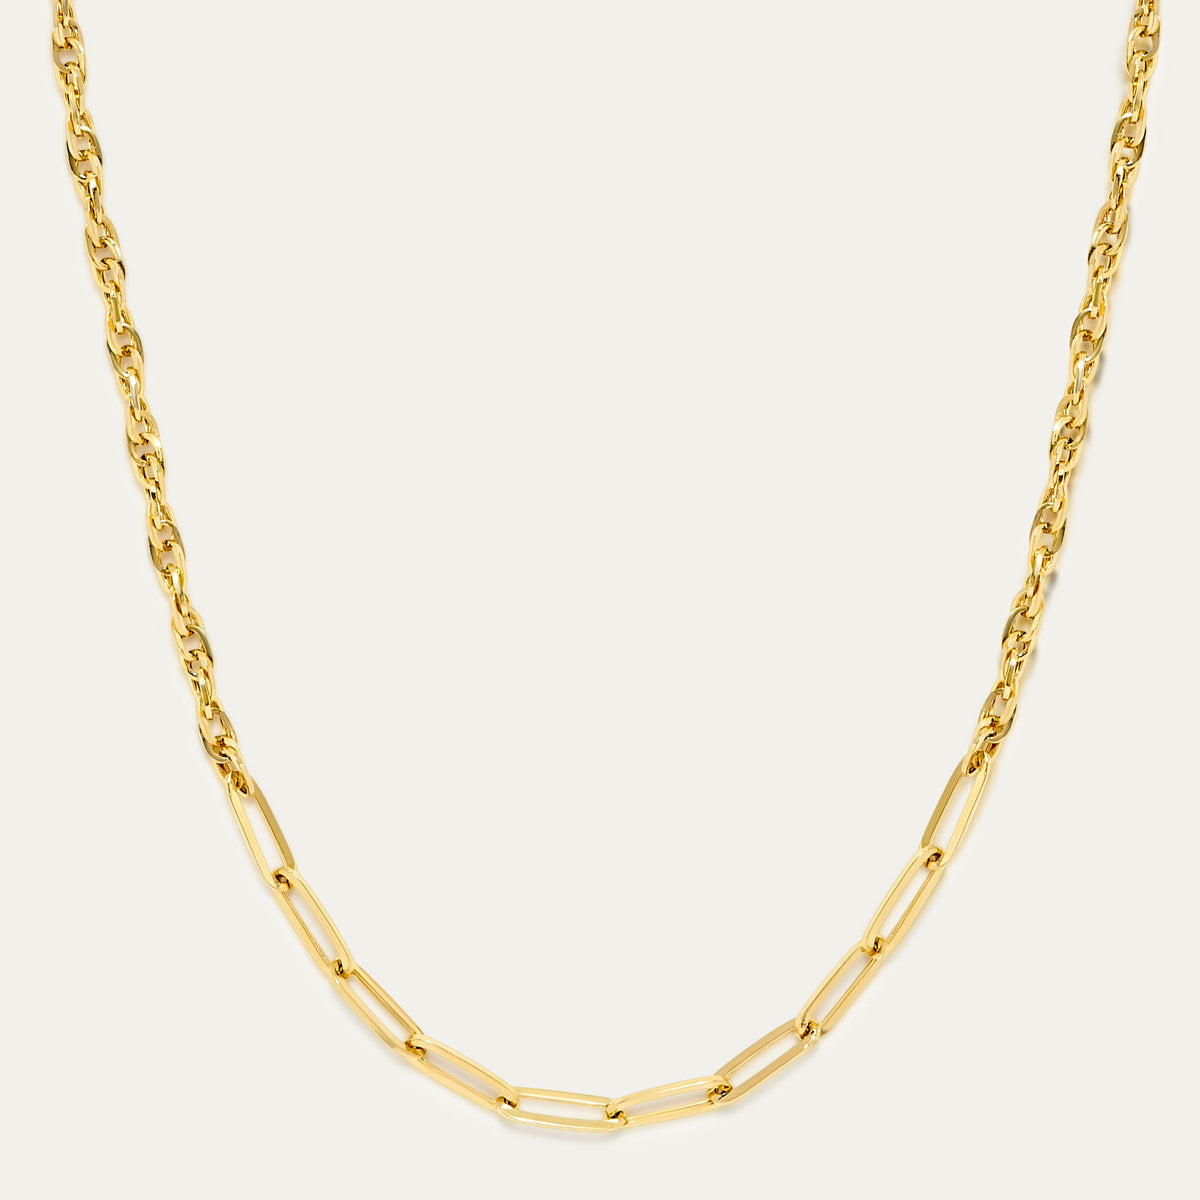 14K GOLD CABLE AND LINK CHAIN